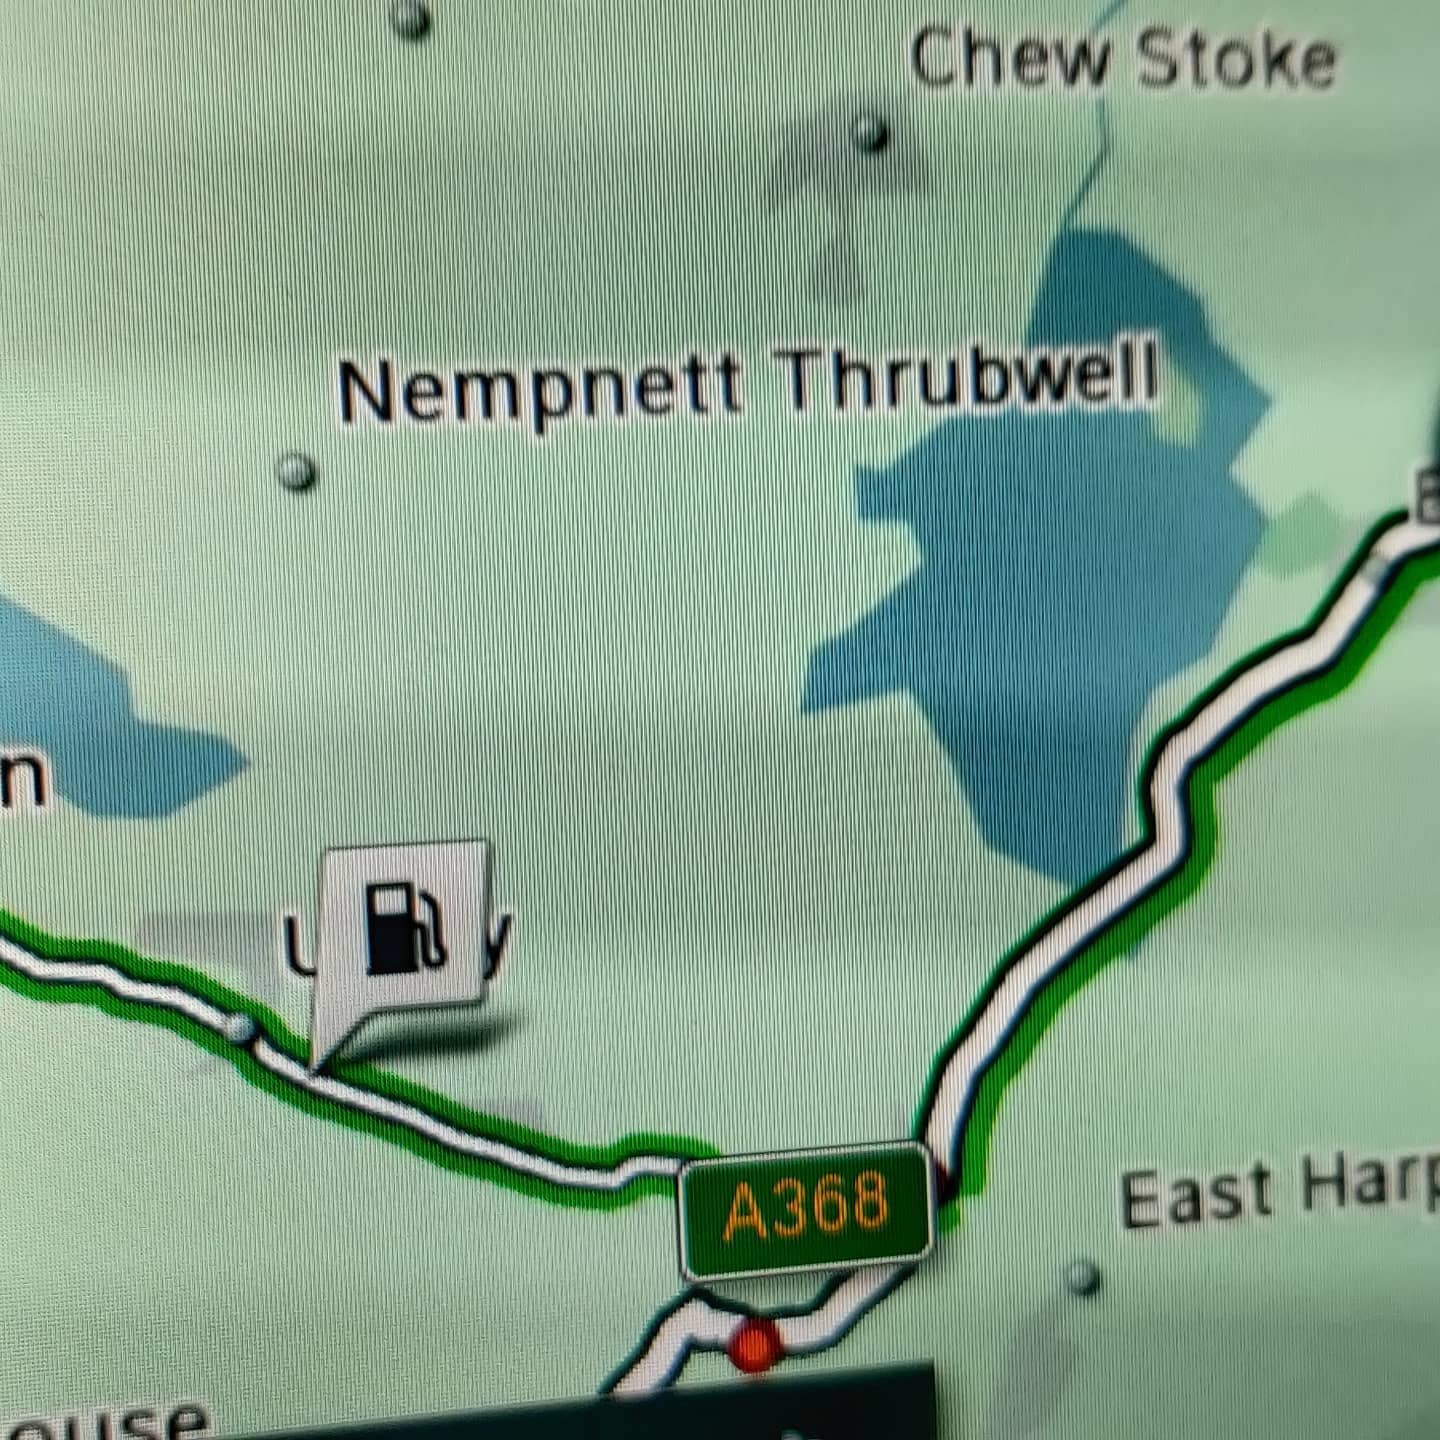 I was Today Years Old when I learned that a place existed in England called Nempnett Thrubwell. Sounds like someone who invented an early version of the self-adhesive postage stamp, or something.